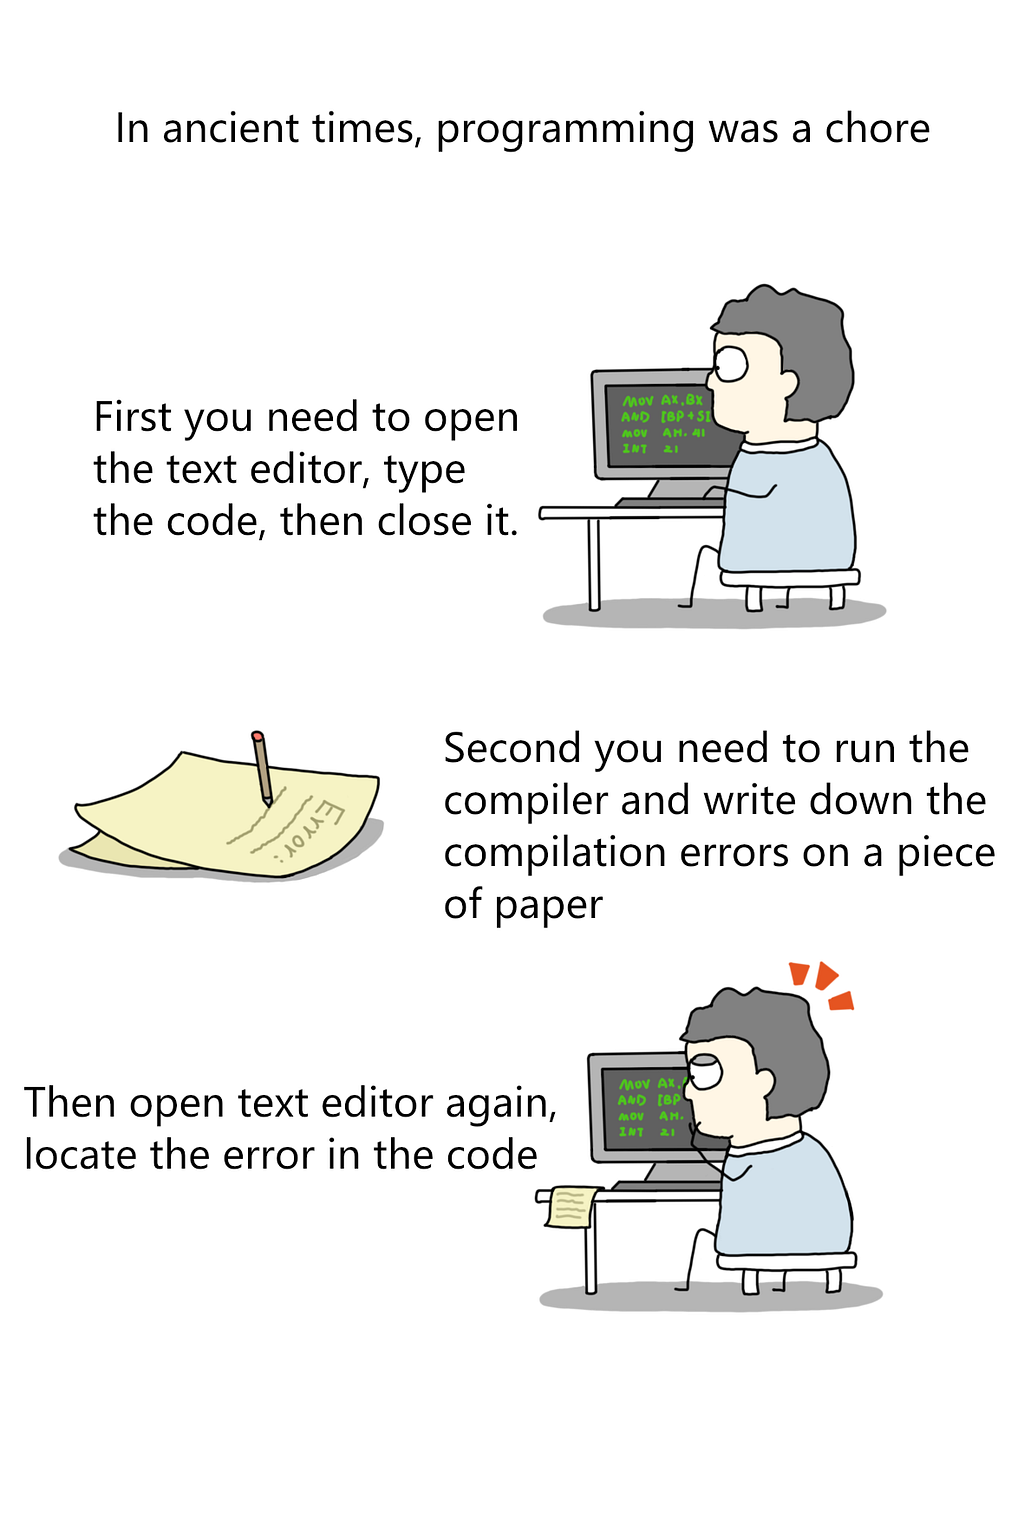 in ancient times, programming was a chore.
 first open the text editor, type, close.
 second, run the compiler, write compilation errors on paper.
 then open text editor again, locate error code.